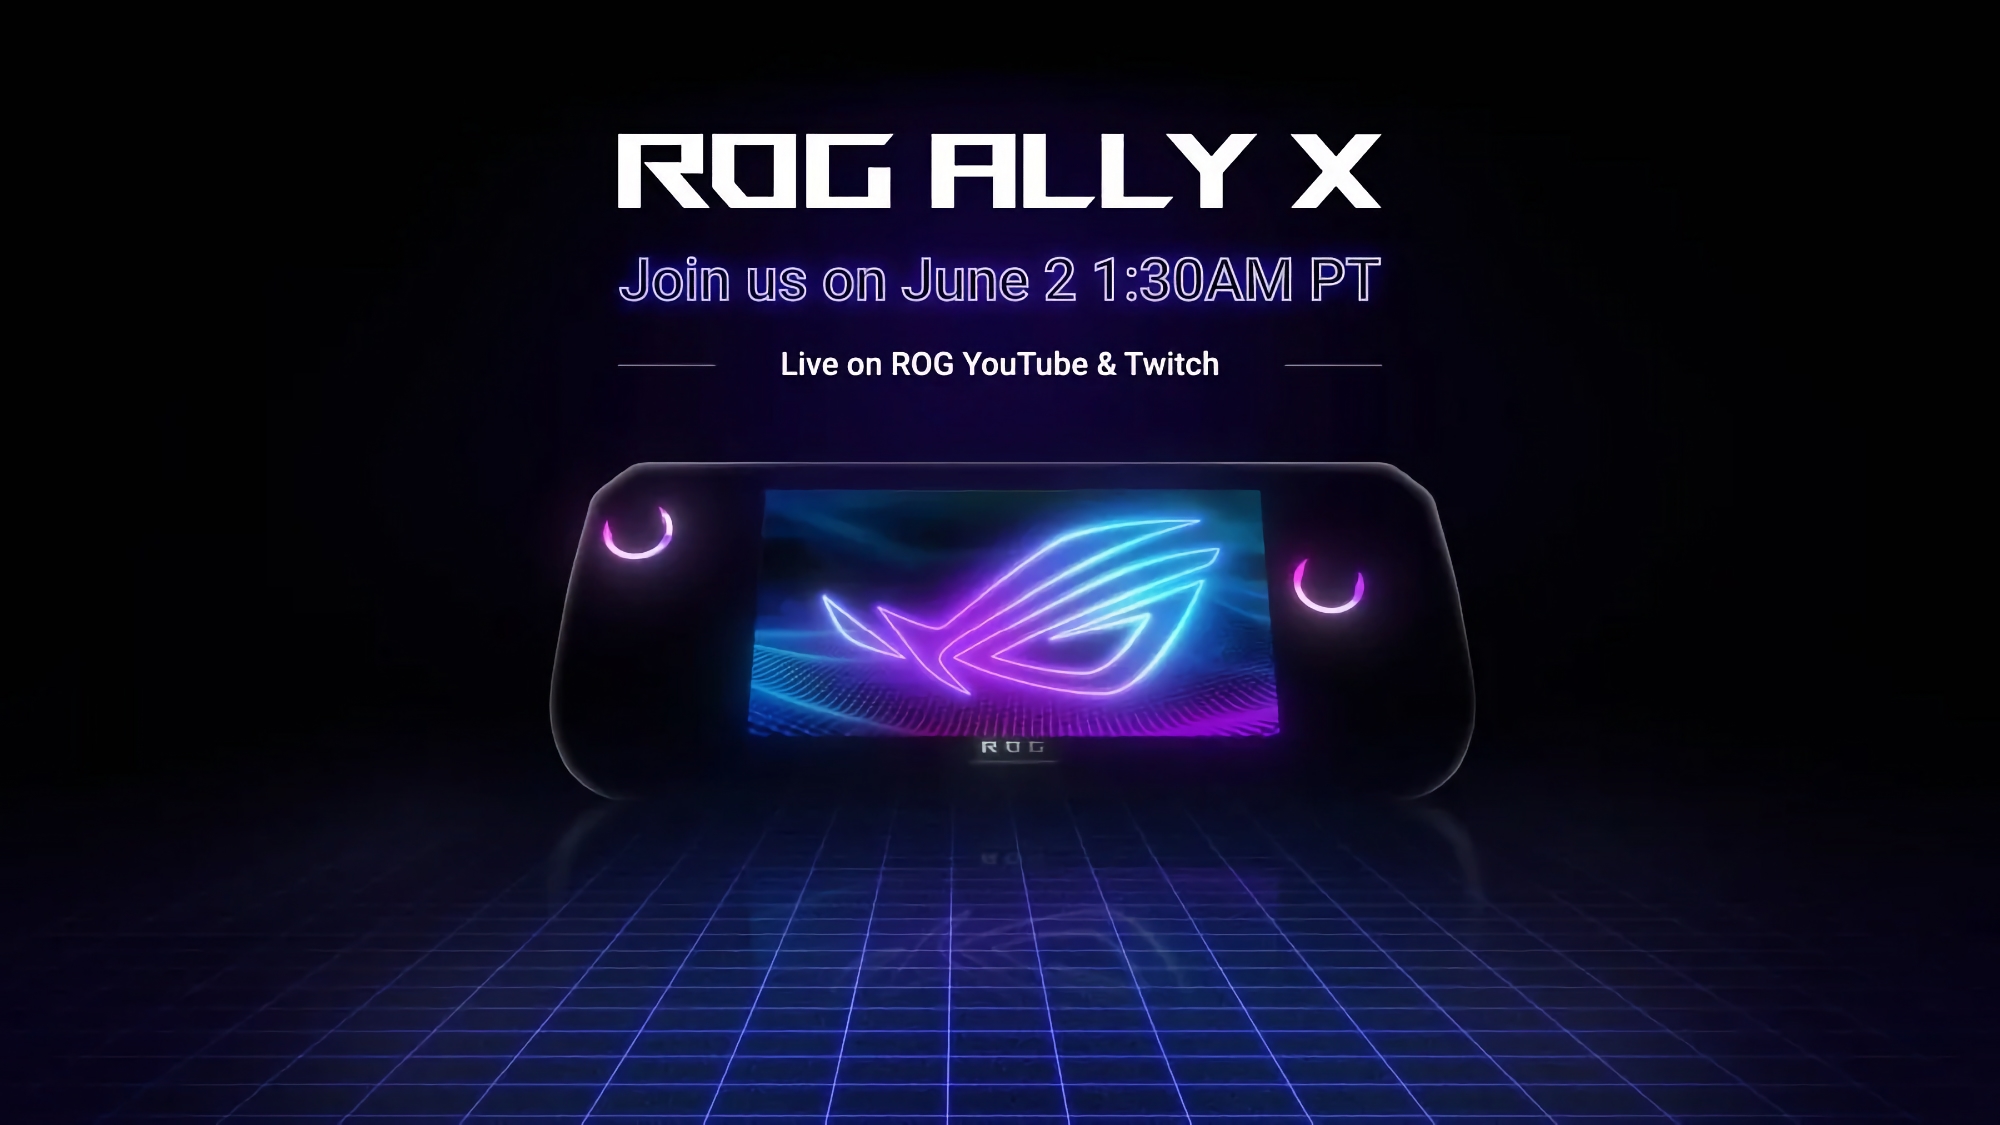 A few days before the presentation: detailed specifications of ASUS ROG Ally X have surfaced online